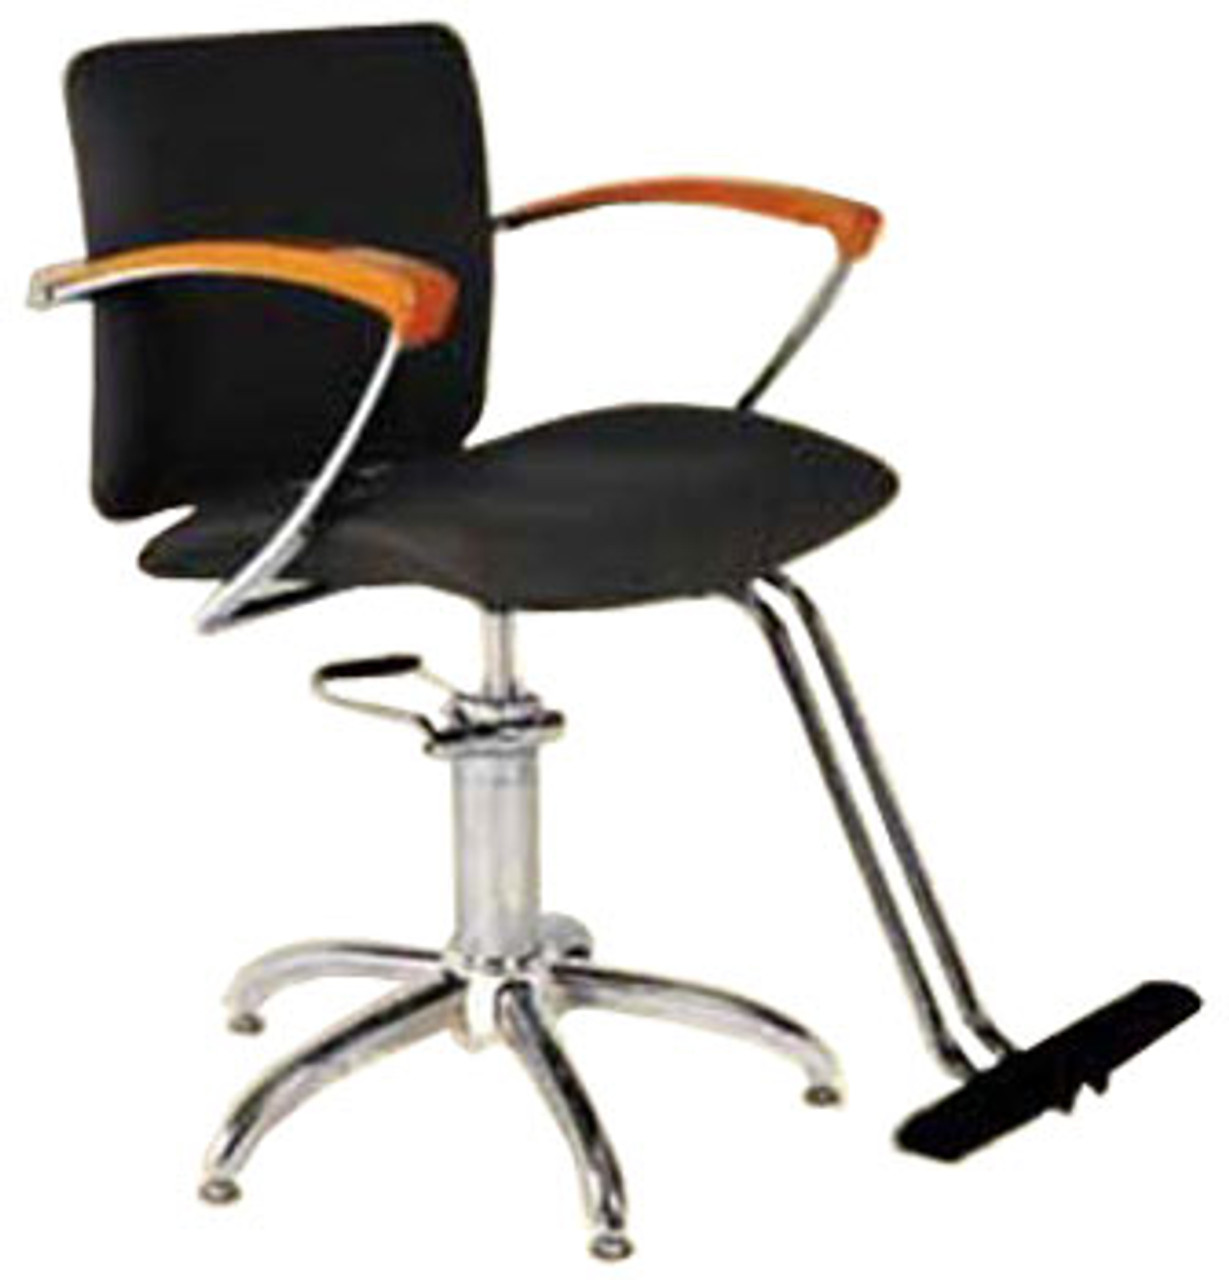 Styling Chair - H2110